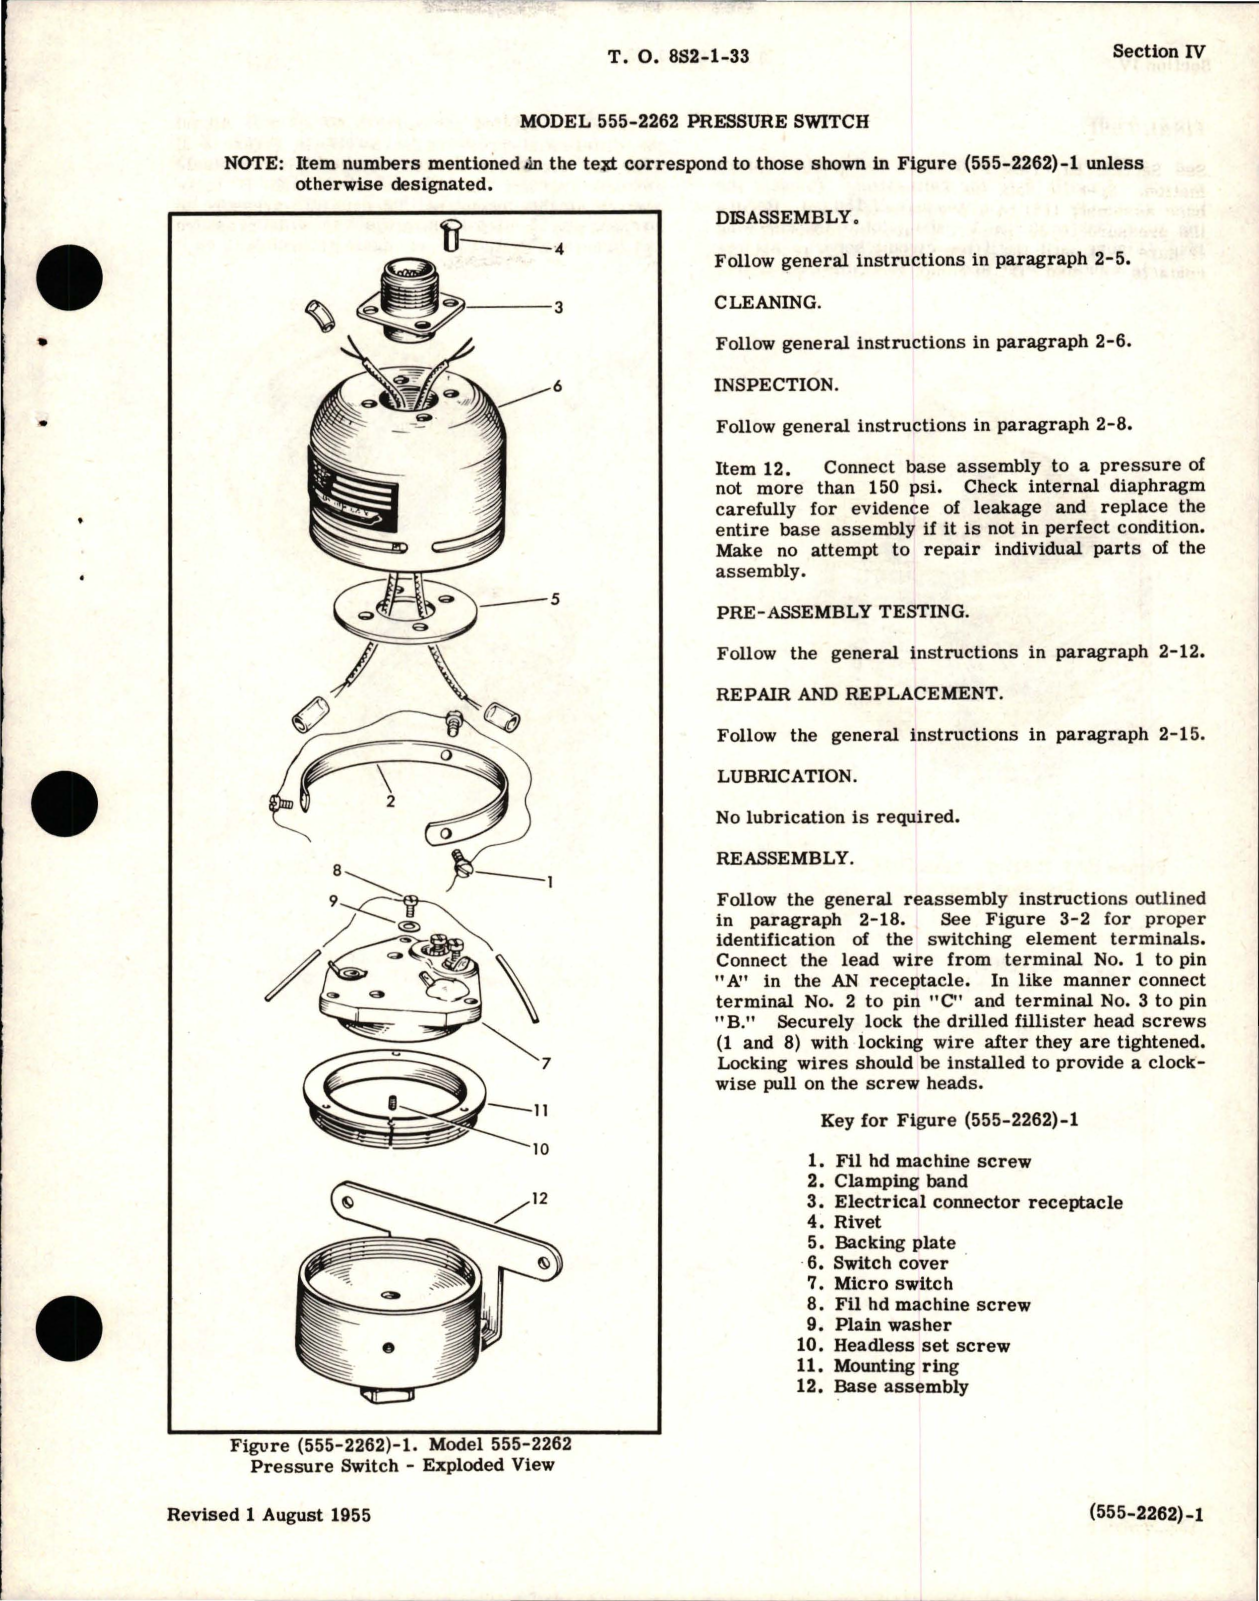 Sample page 7 from AirCorps Library document: Overhaul Instructions for Pressure Control Switches